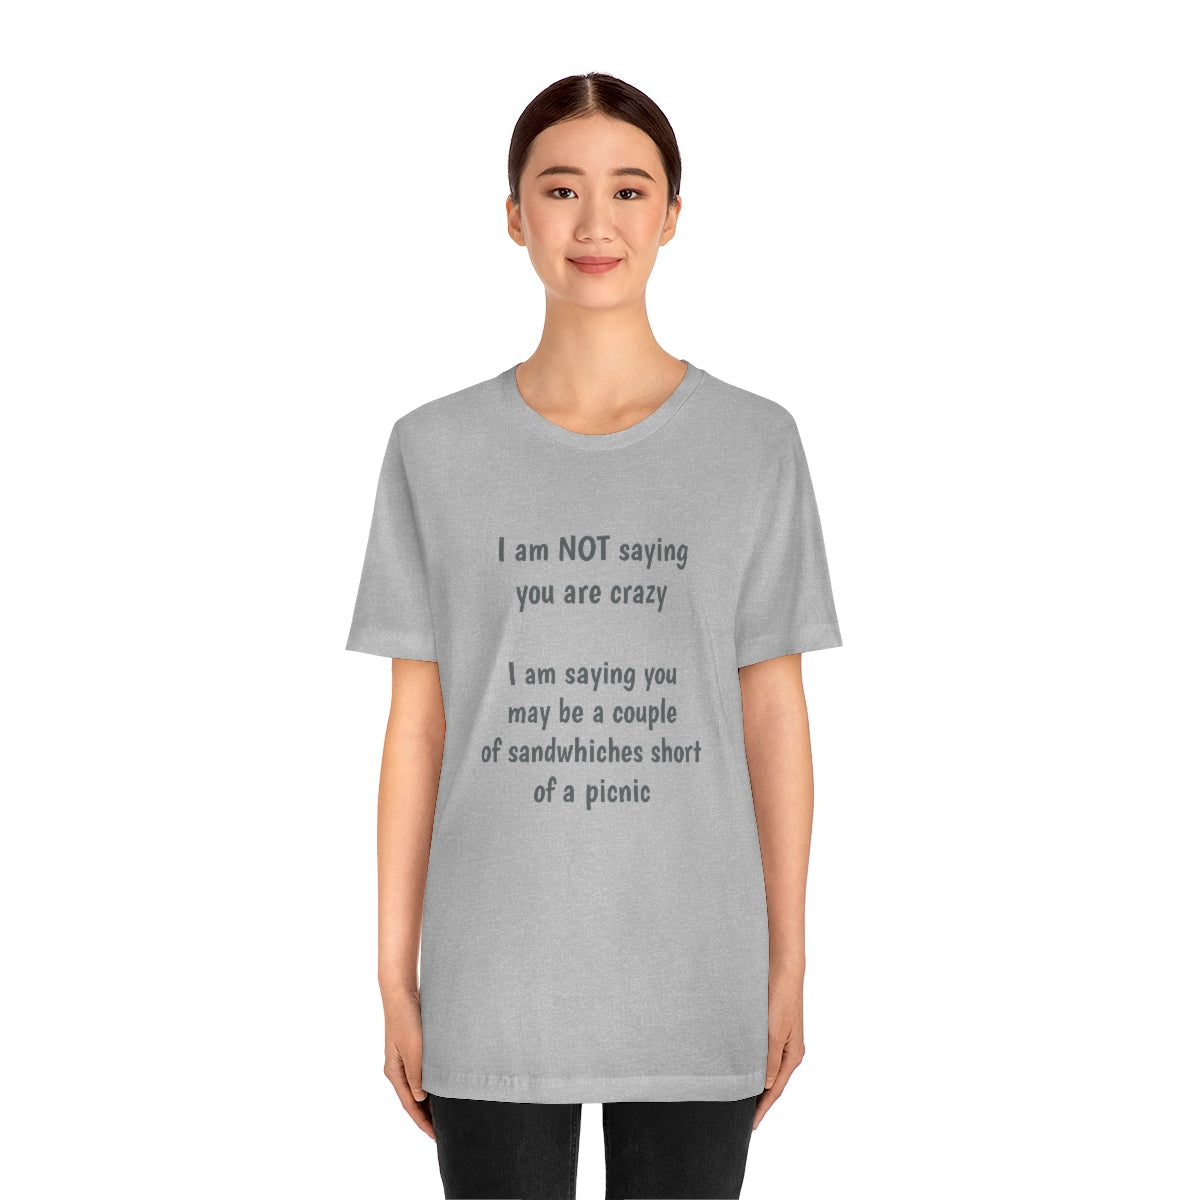 I am NOT saying you are crazy... - Unisex Jersey Short Sleeve Tee